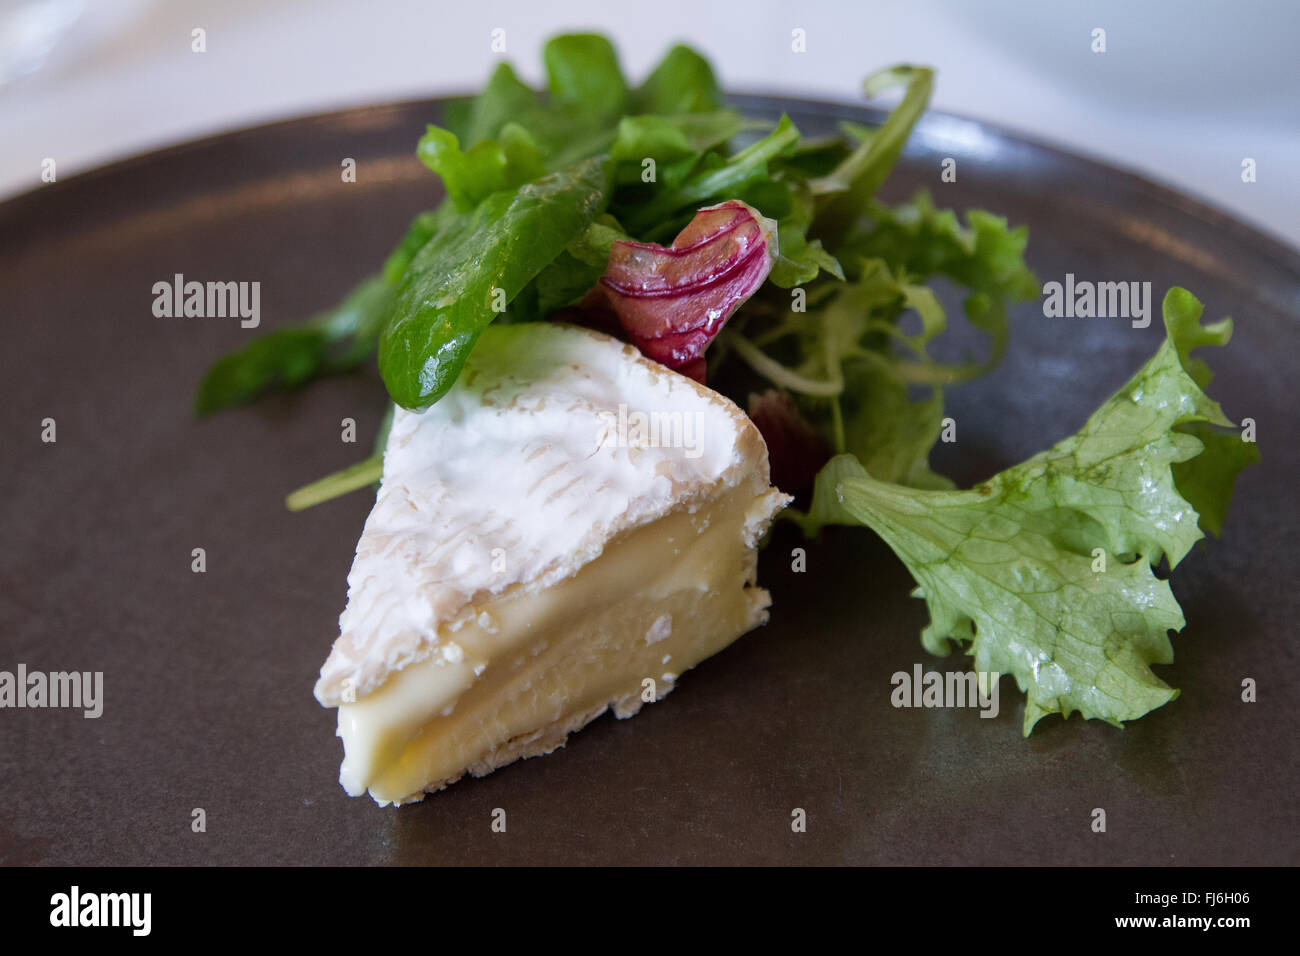 French Camembert cheese with green salad Stock Photo